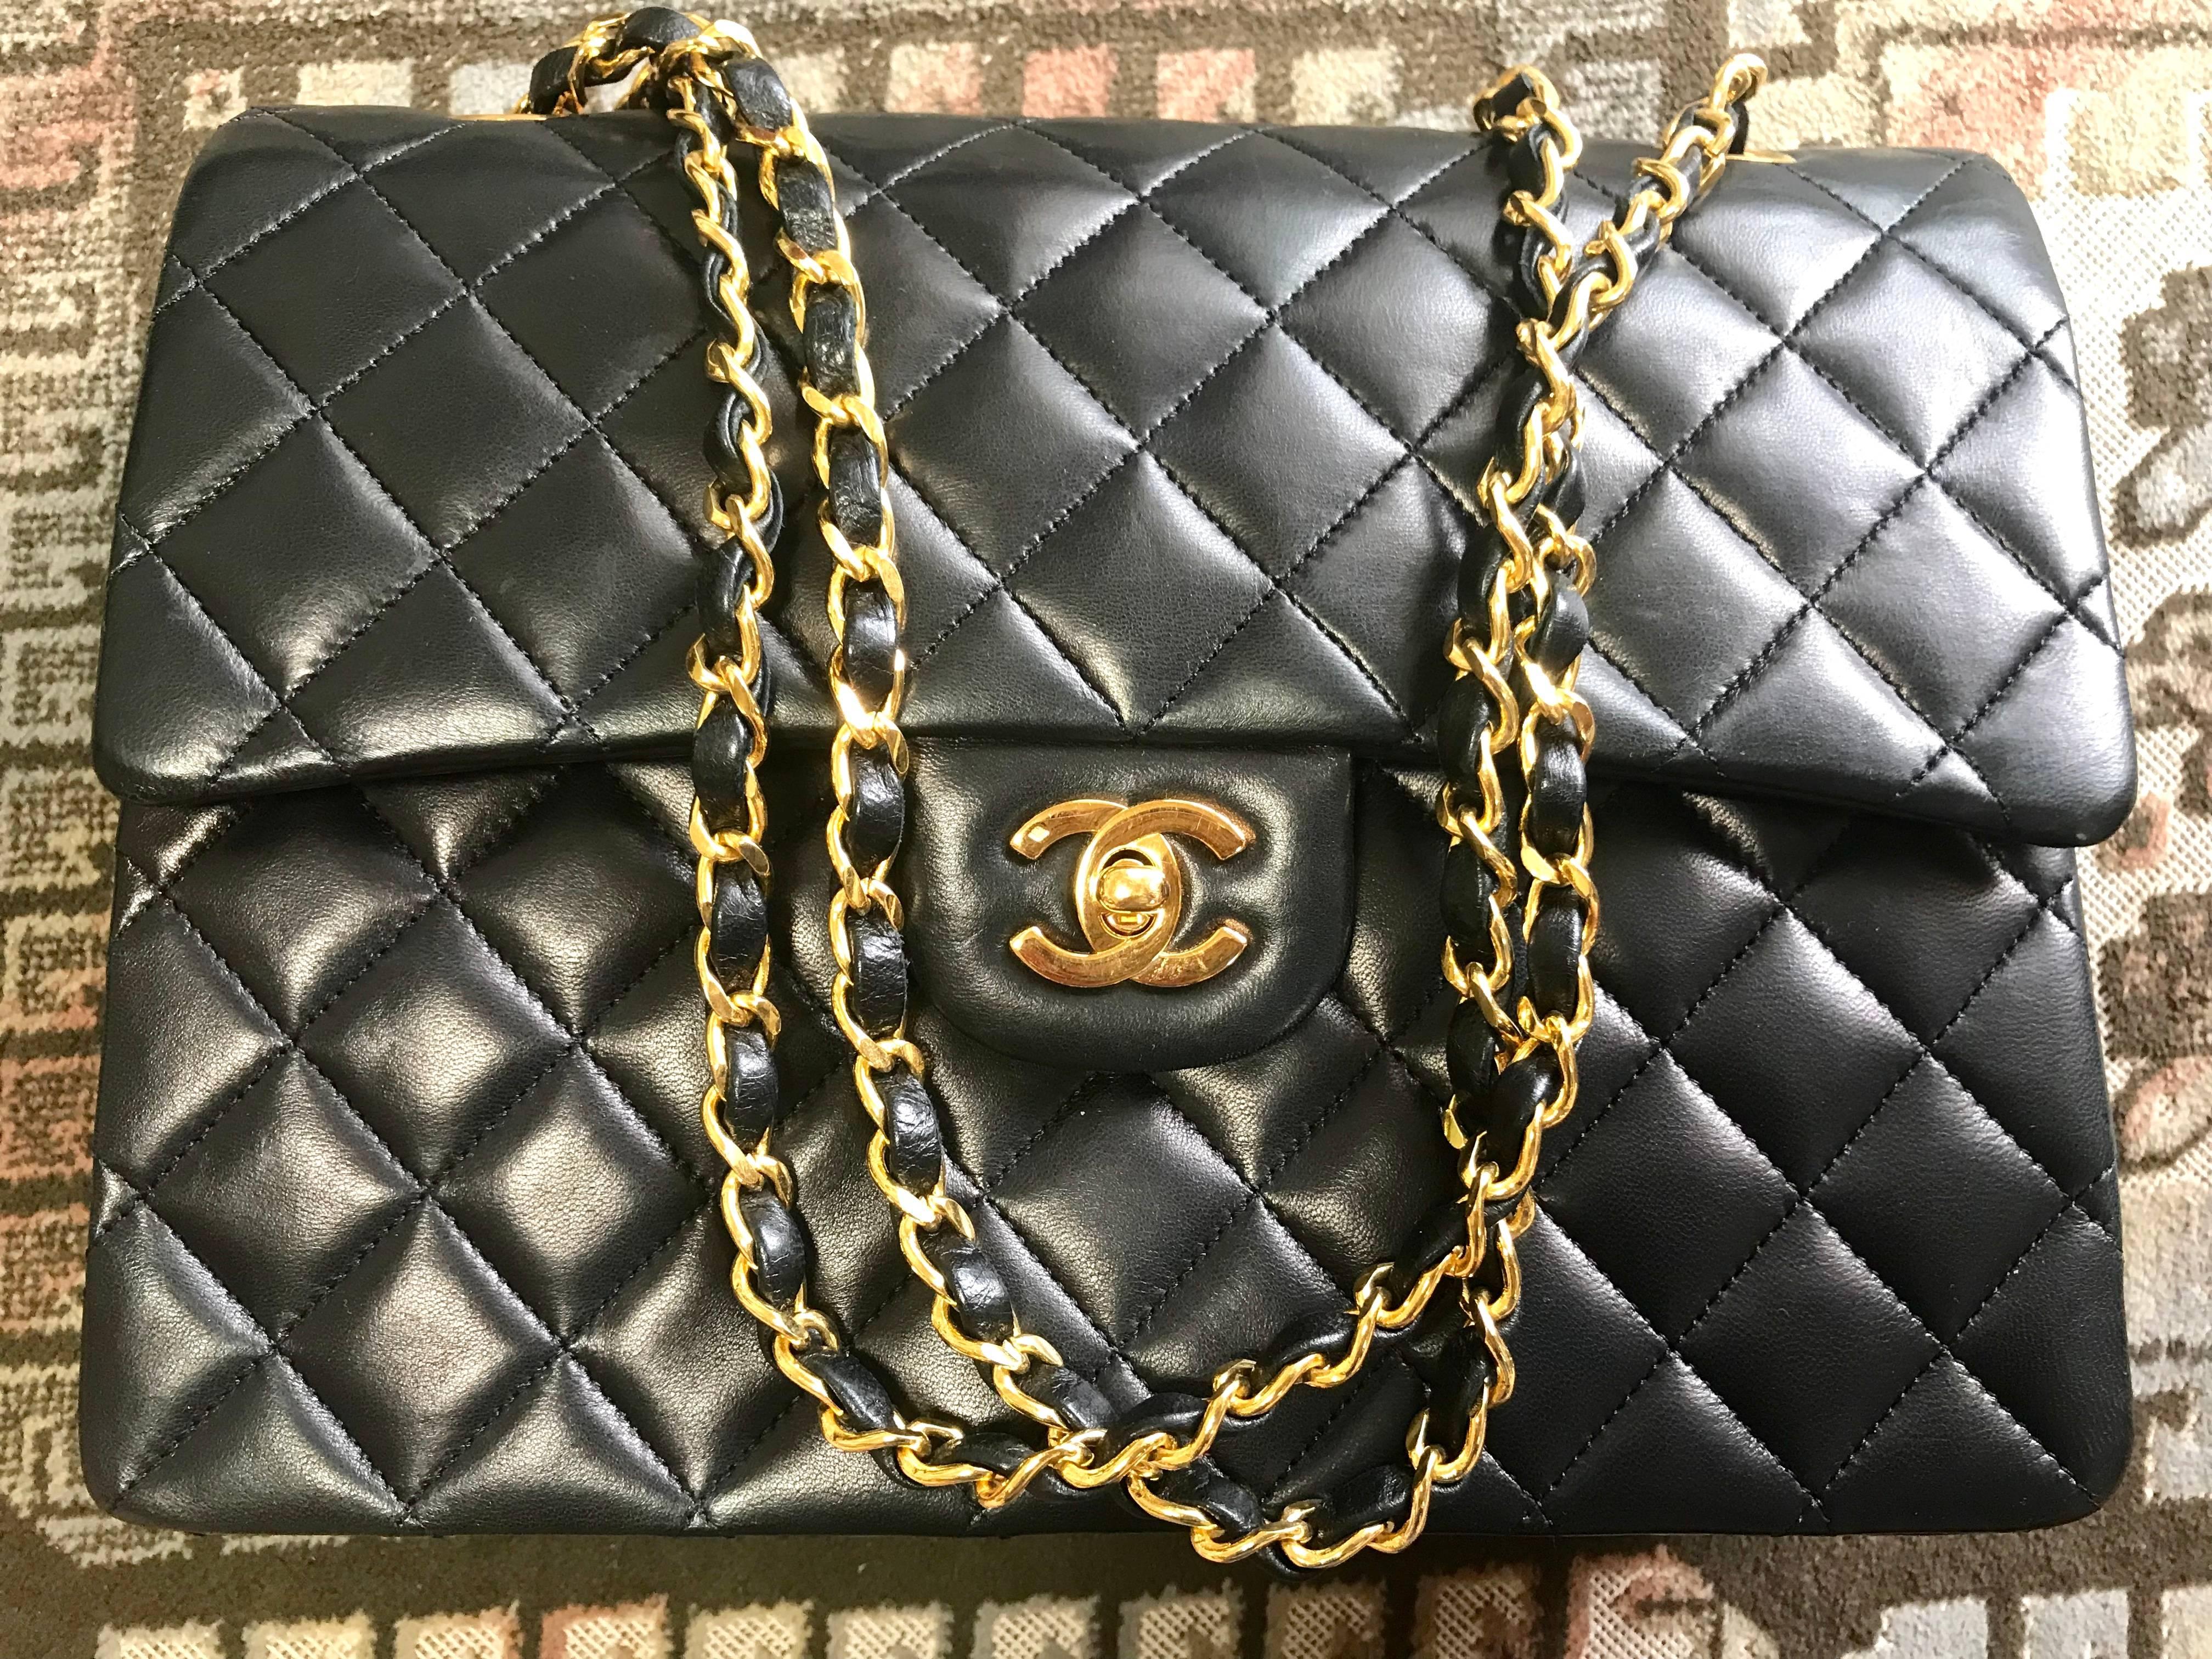 1980s. MINT/Excellent condition. Vintage CHANEL black lambskin classic 2.55 double flap shoulder purse with gold tone chain straps. Make you even more chic.


Introducing another vintage piece, a classic black lamb leather 2.55 double flap purse